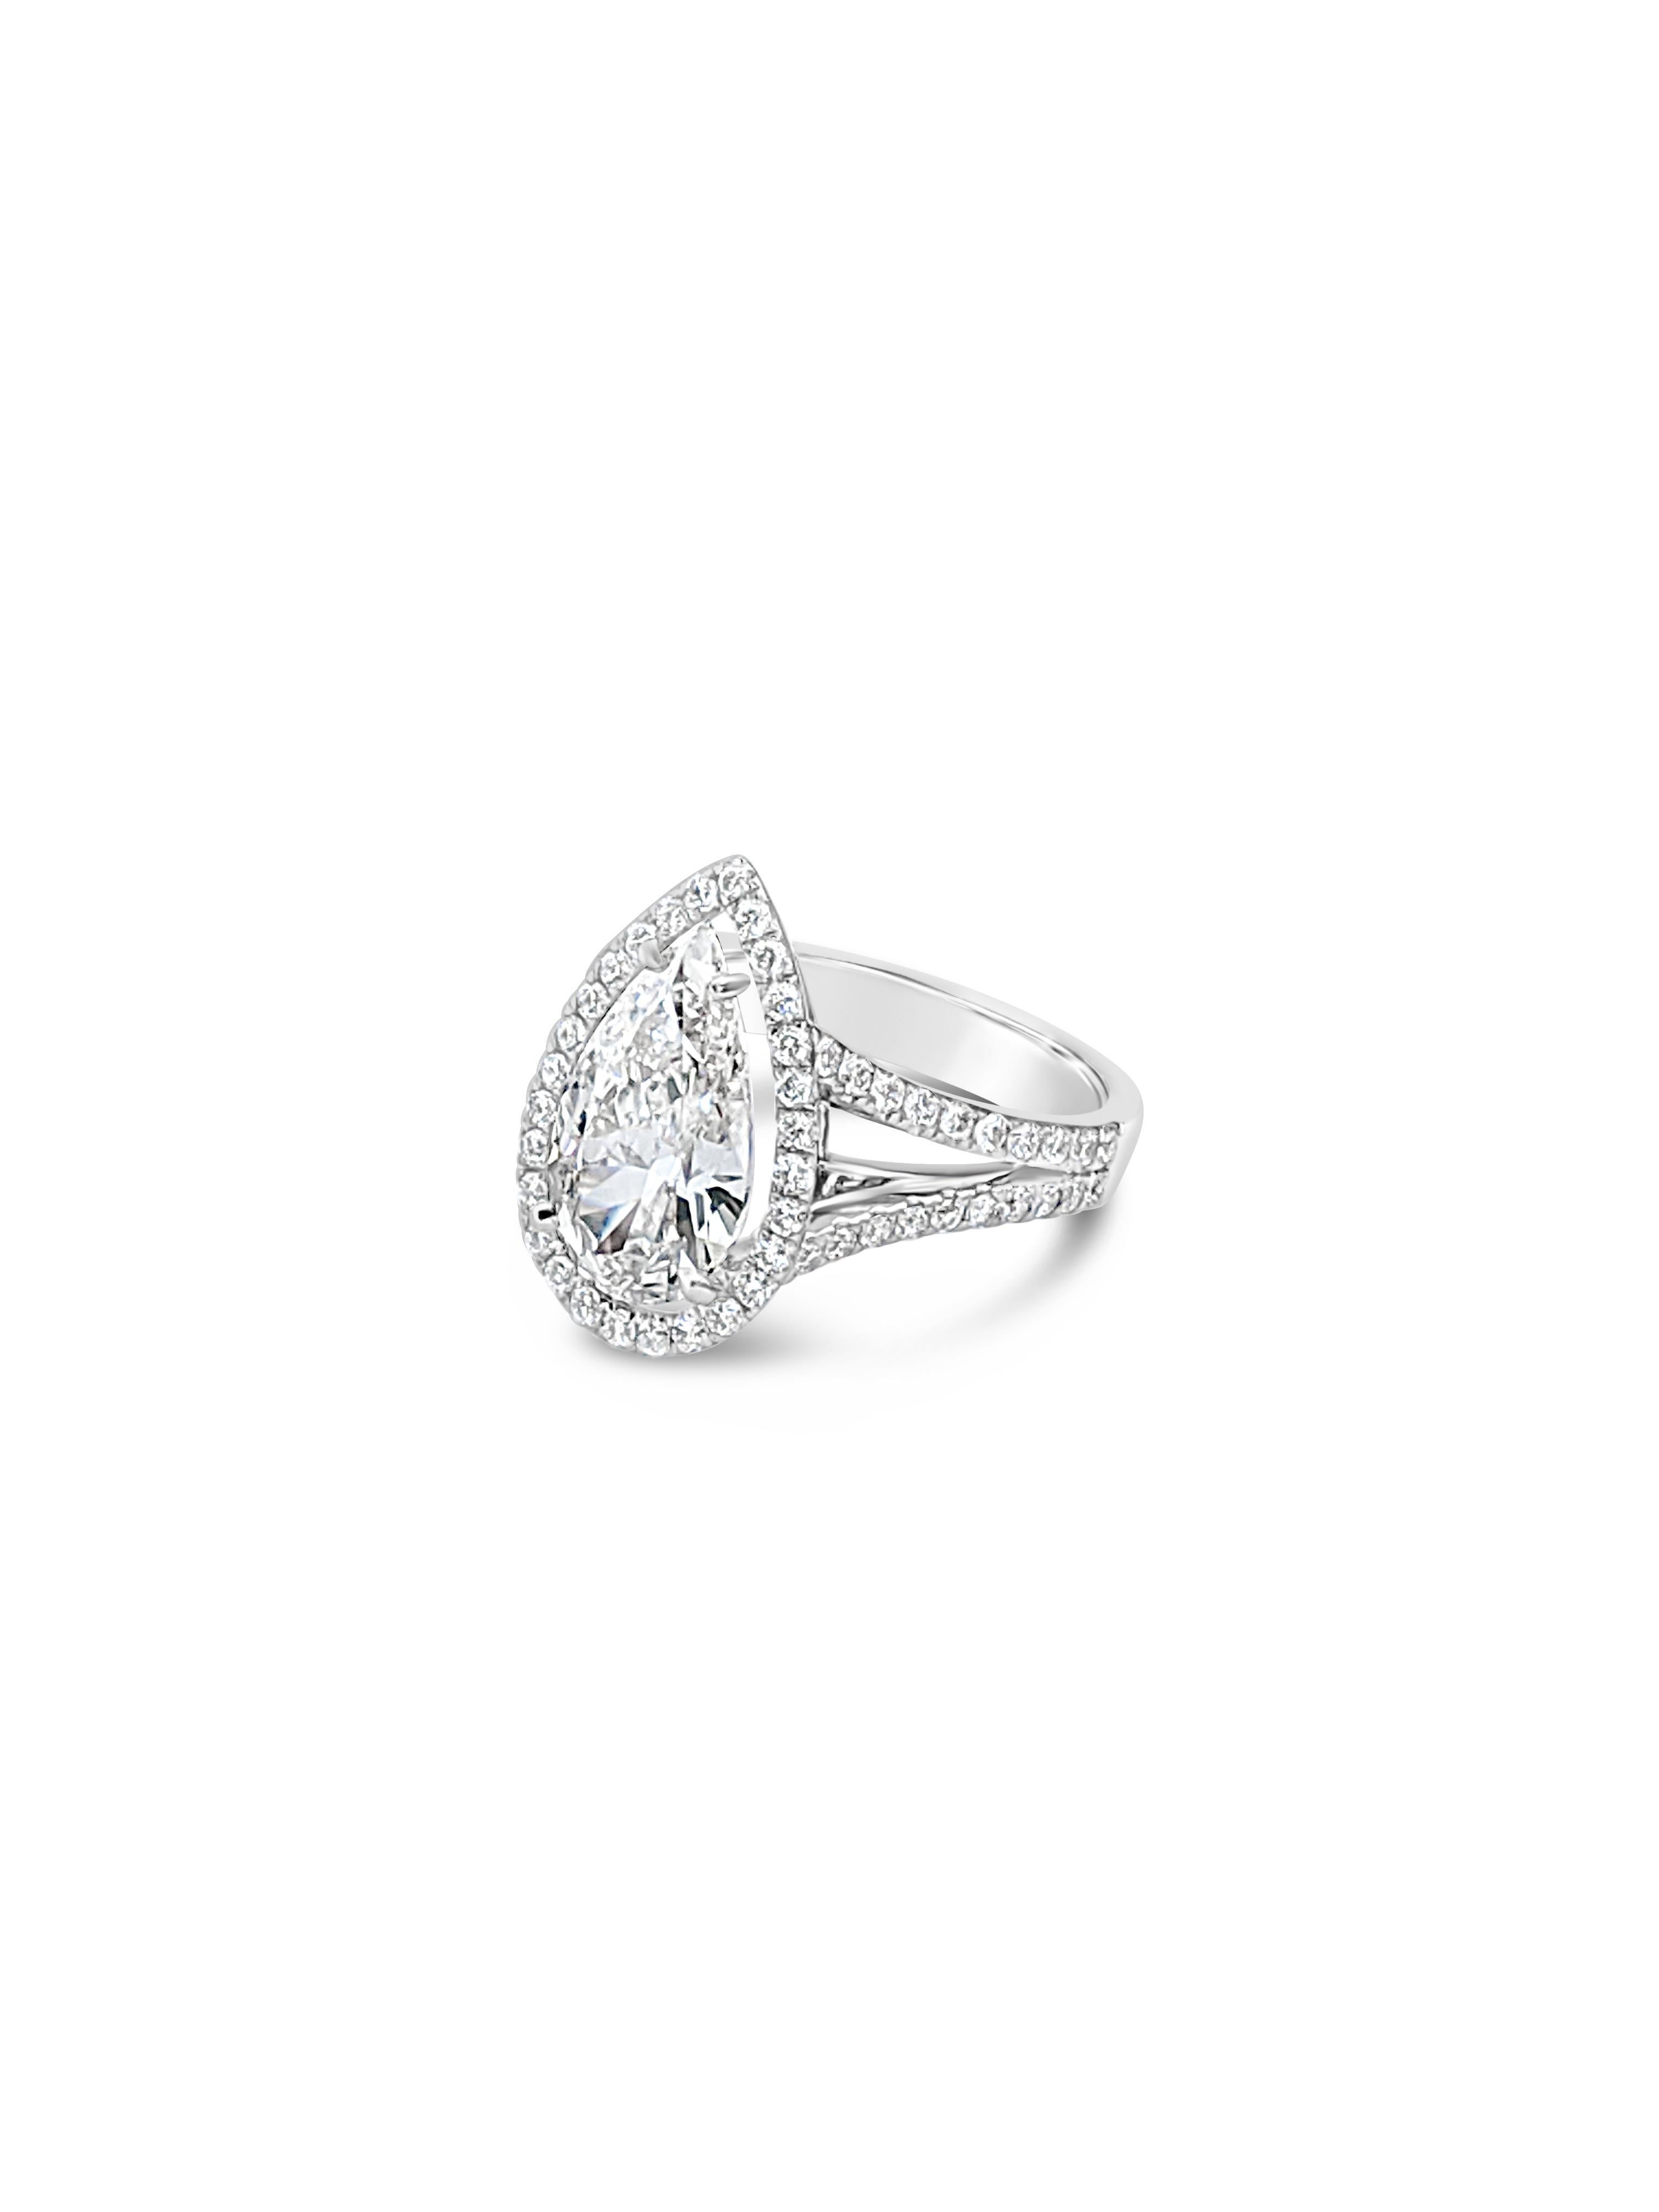 A stunning 3 carat pear shape diamond is set delicately in a halo of super fine white diamonds that is balanced on a perfect split shank of pave set diamonds.   Combining a classic glamorous diamond cut with a modern setting creates an unique work